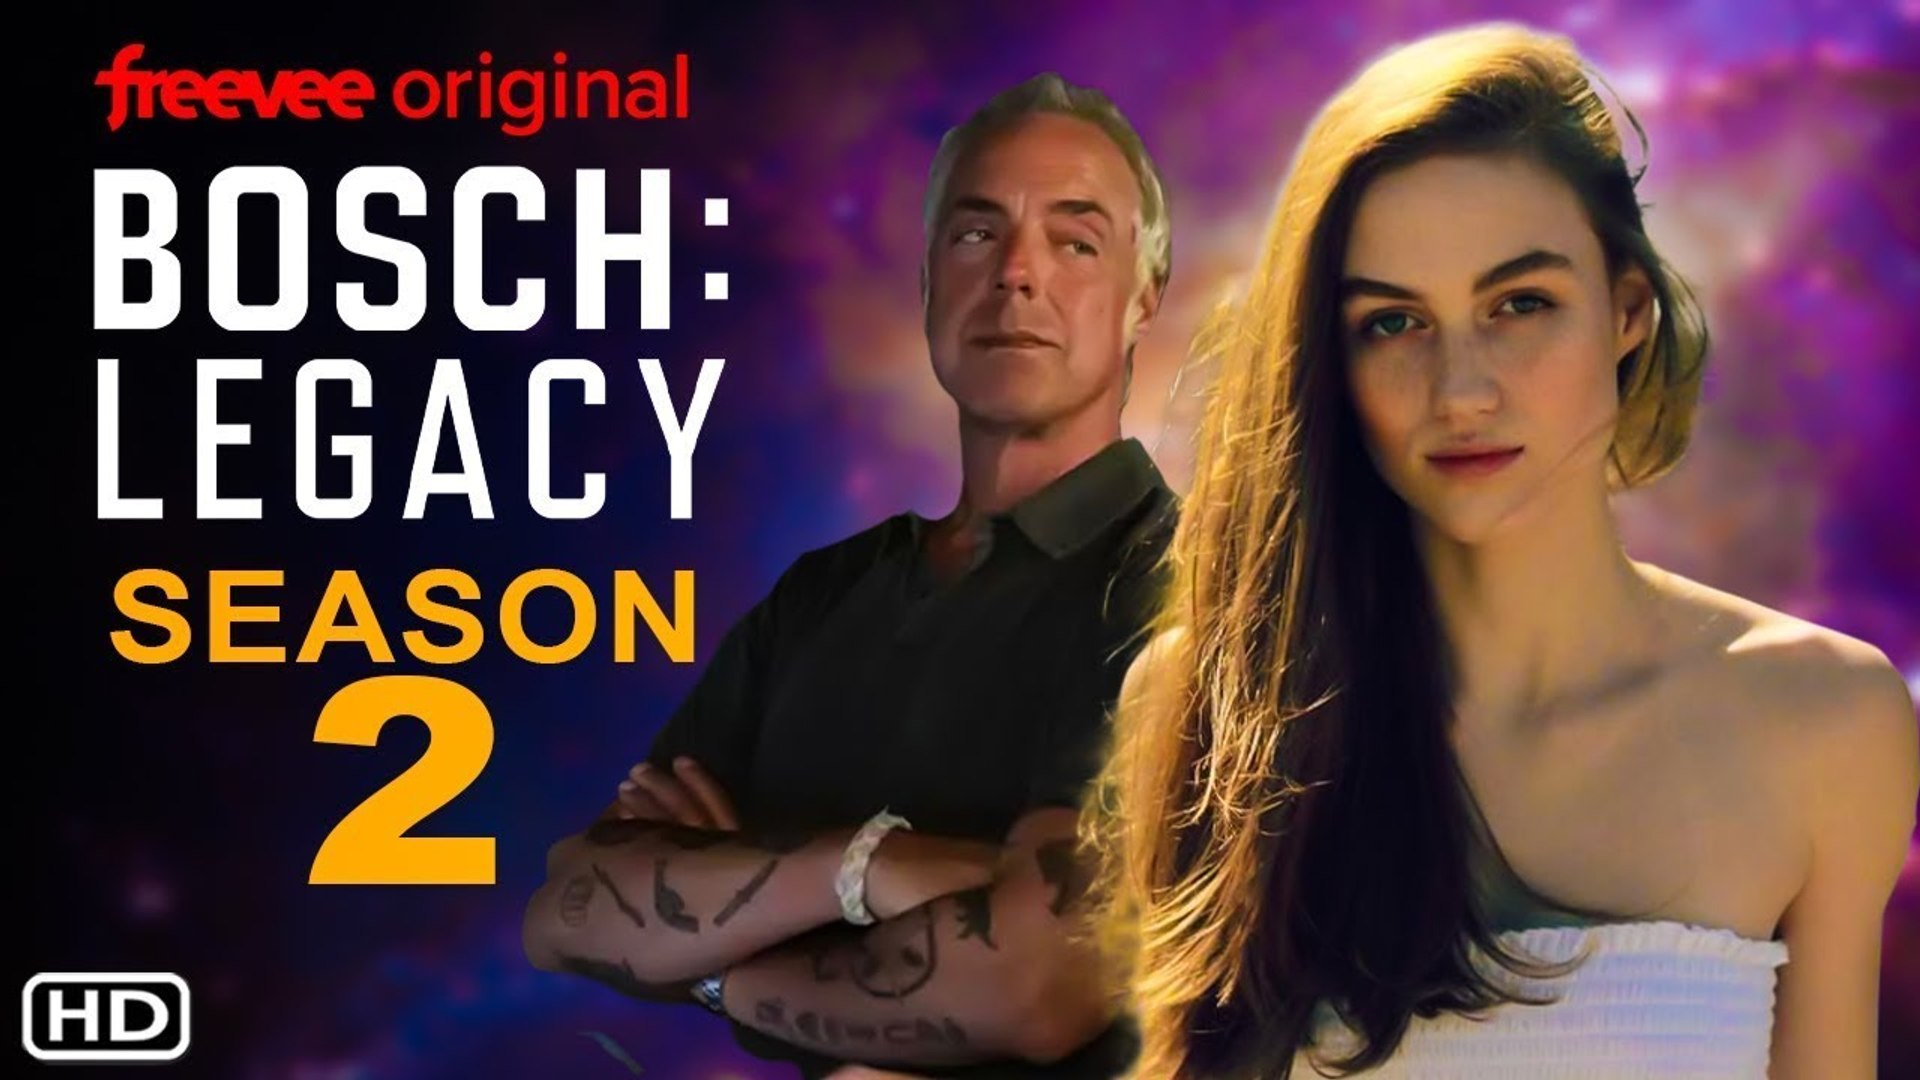 Bosch Legacy Season 2 Teaser -  Freevee, Review - video Dailymotion